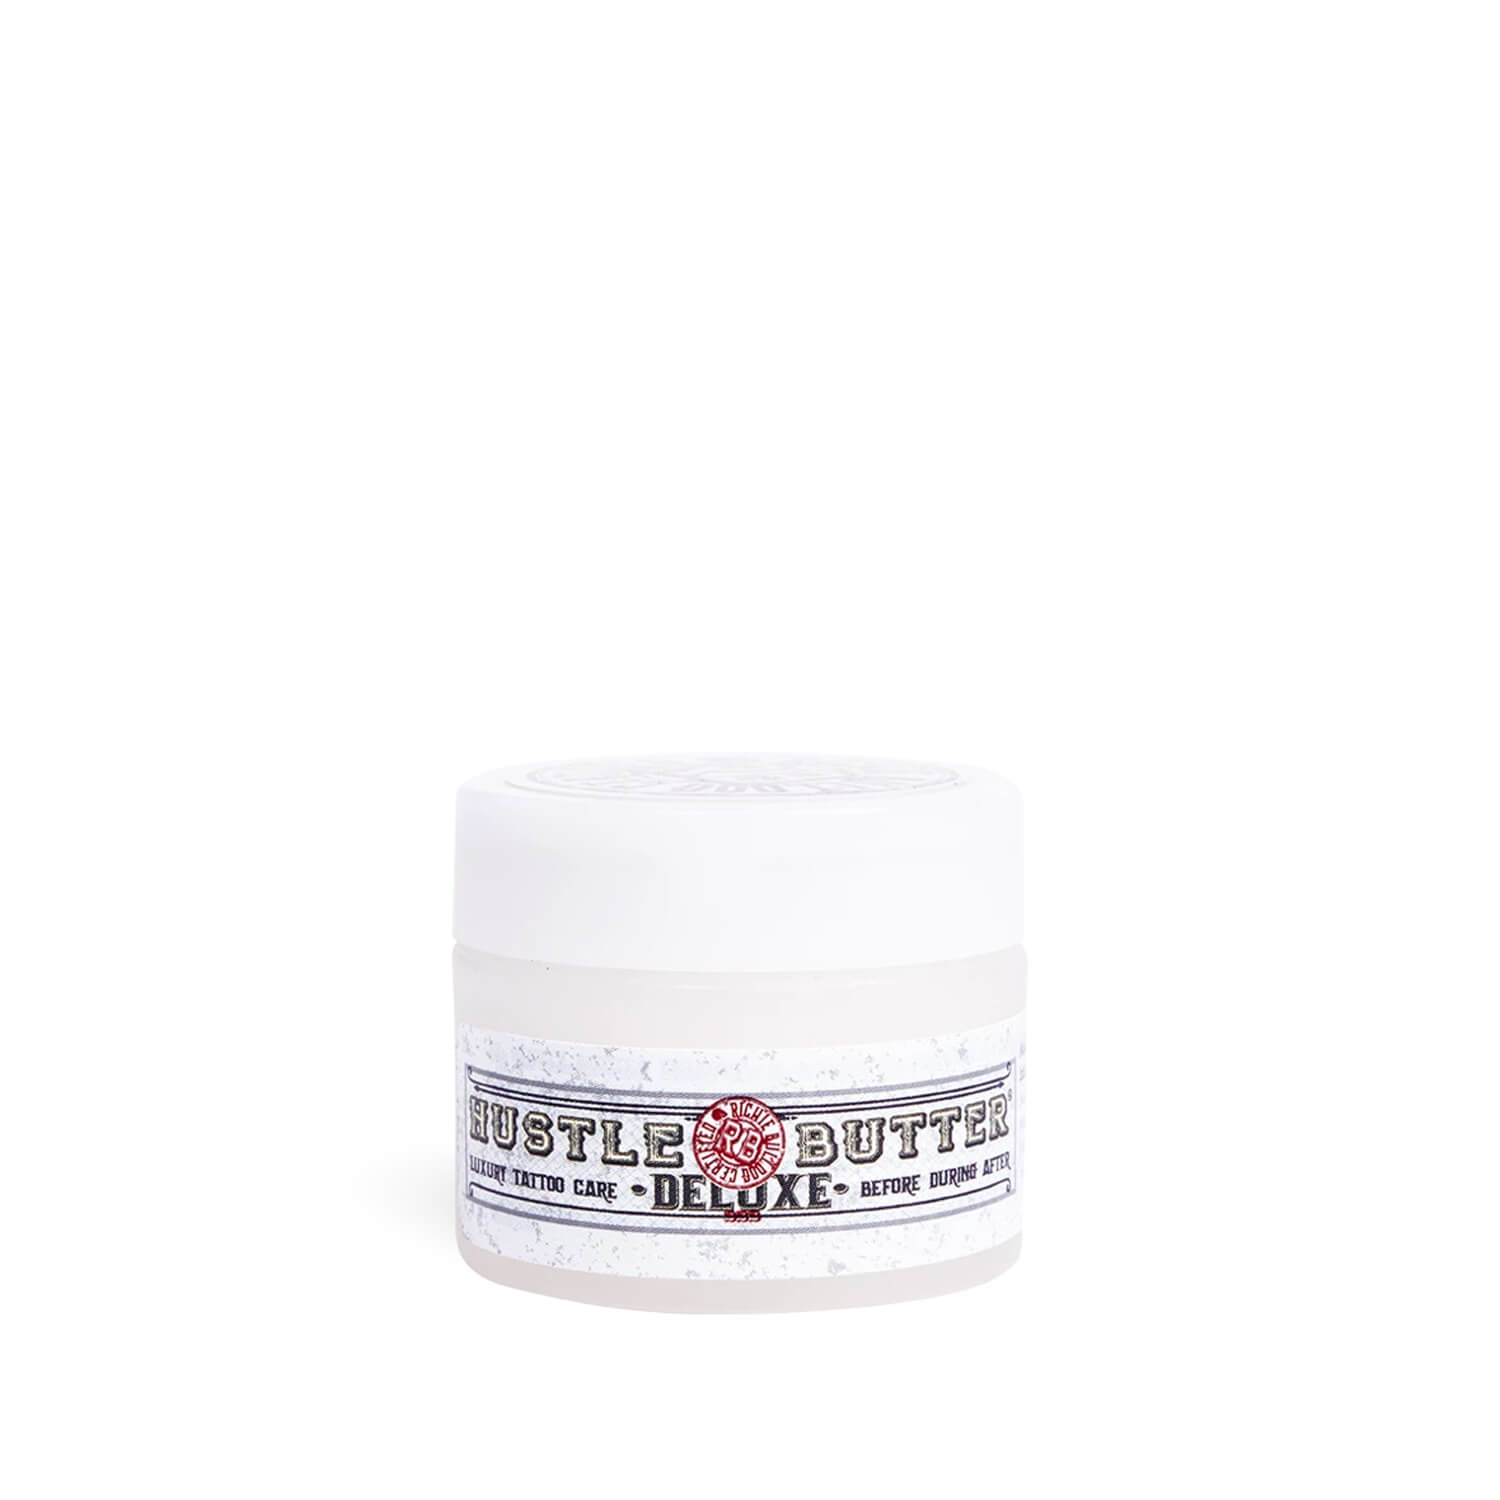 Hustle Butter Deluxe Vegan Tattoo Aftercare 1oz - Tattcare Limited